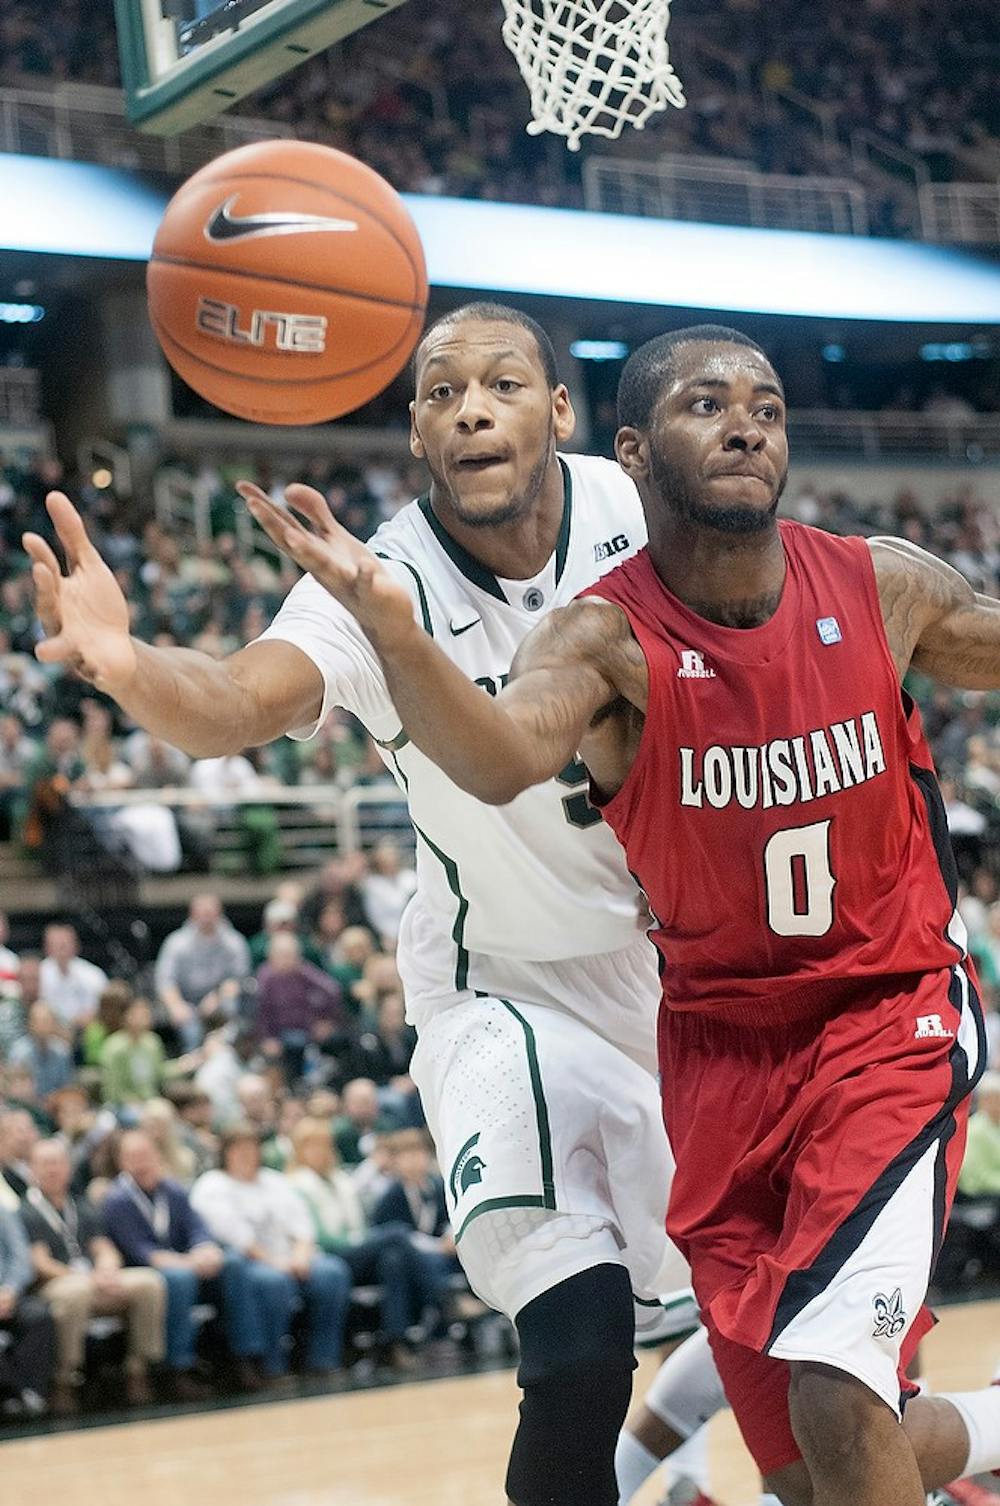 	<p>Junior center Adreian Payne attempts to knock the ball away from Louisiana-Lafayette&#8217;s guard Bryant Mbamalu on Nov. 25, 2012, at Breslin Center. The Spartans beat the Ragin&#8217; Cajuns, 63-60. Natalie Kolb/The State News</p>